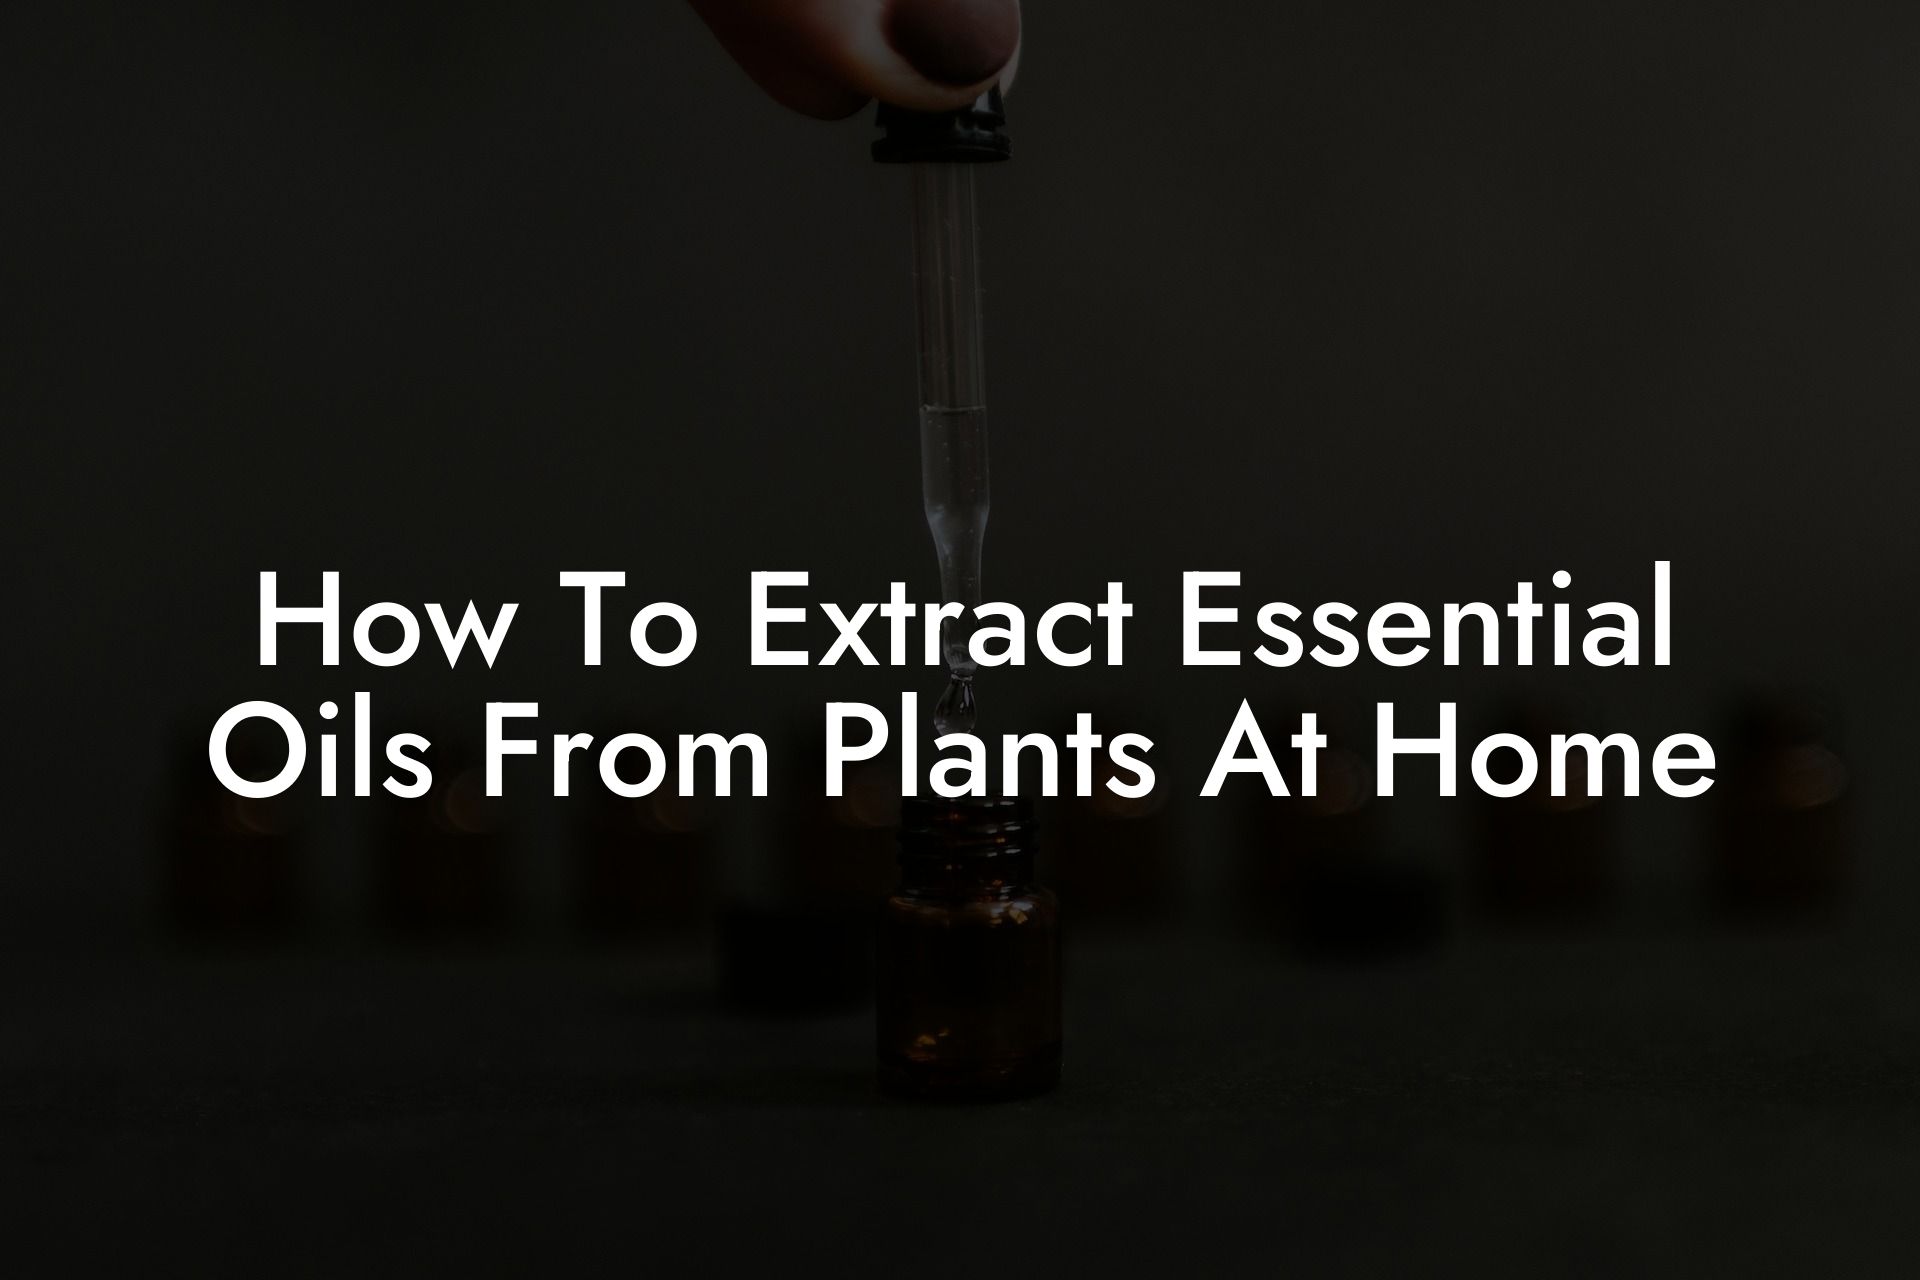 How To Extract Essential Oils From Plants At Home